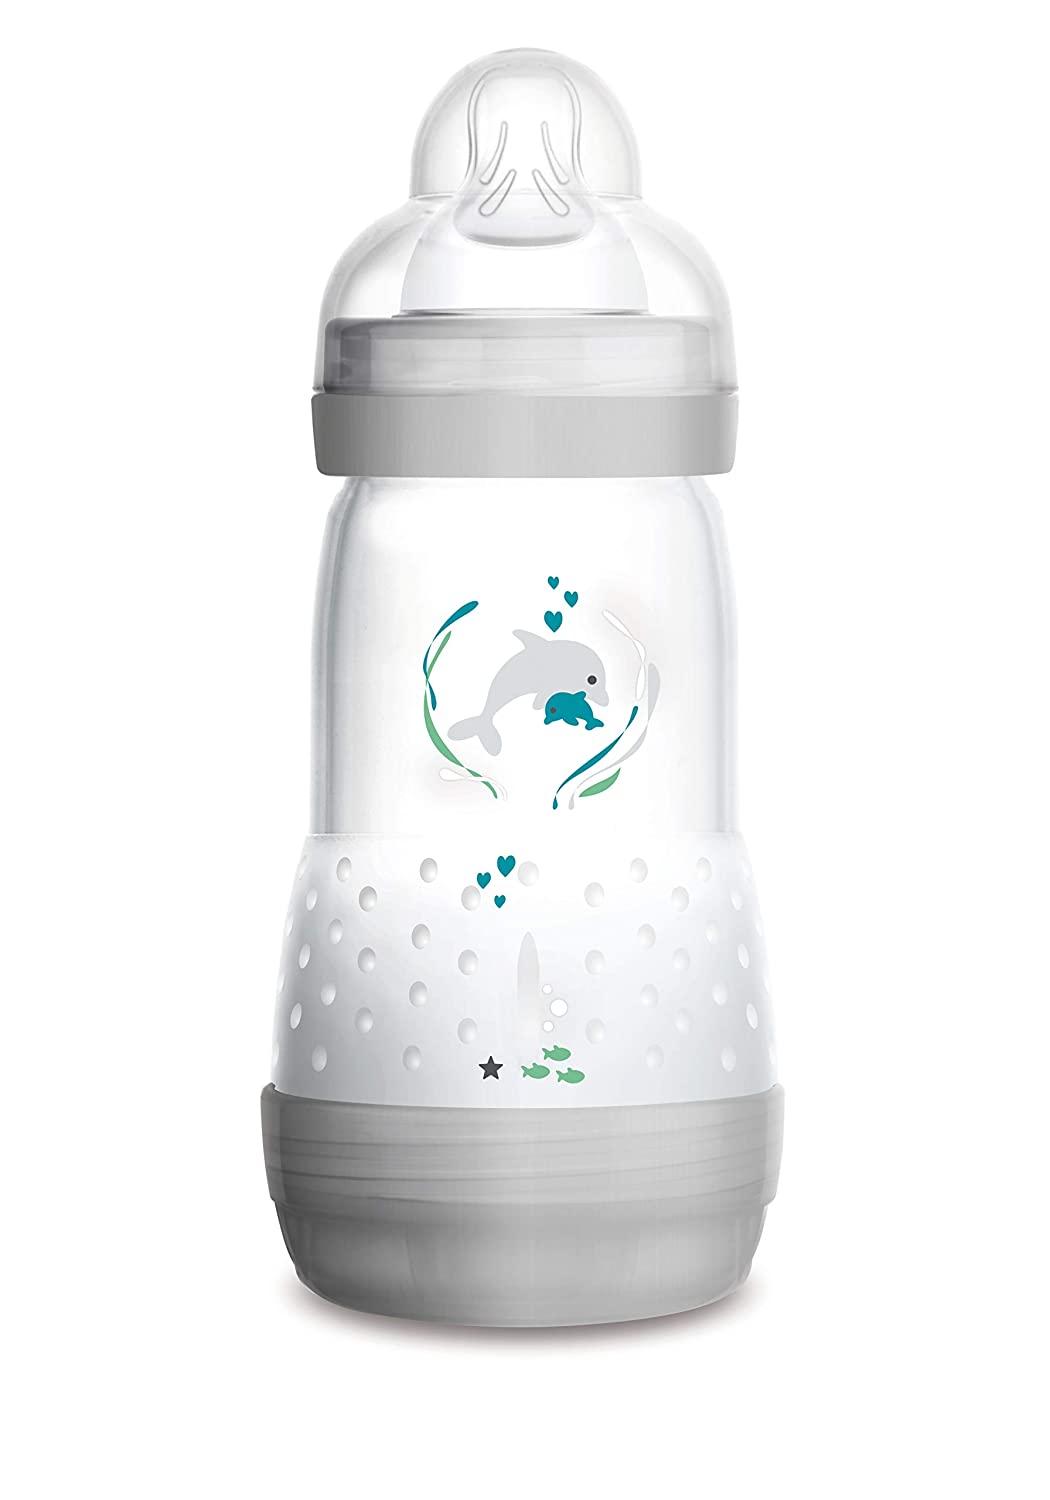 MAM Easy Start anti-colic baby bottle (260 ml), milk bottle with innovative base valve to prevent colic, baby’s drinking bottle with size 1 teat, from birth, seal